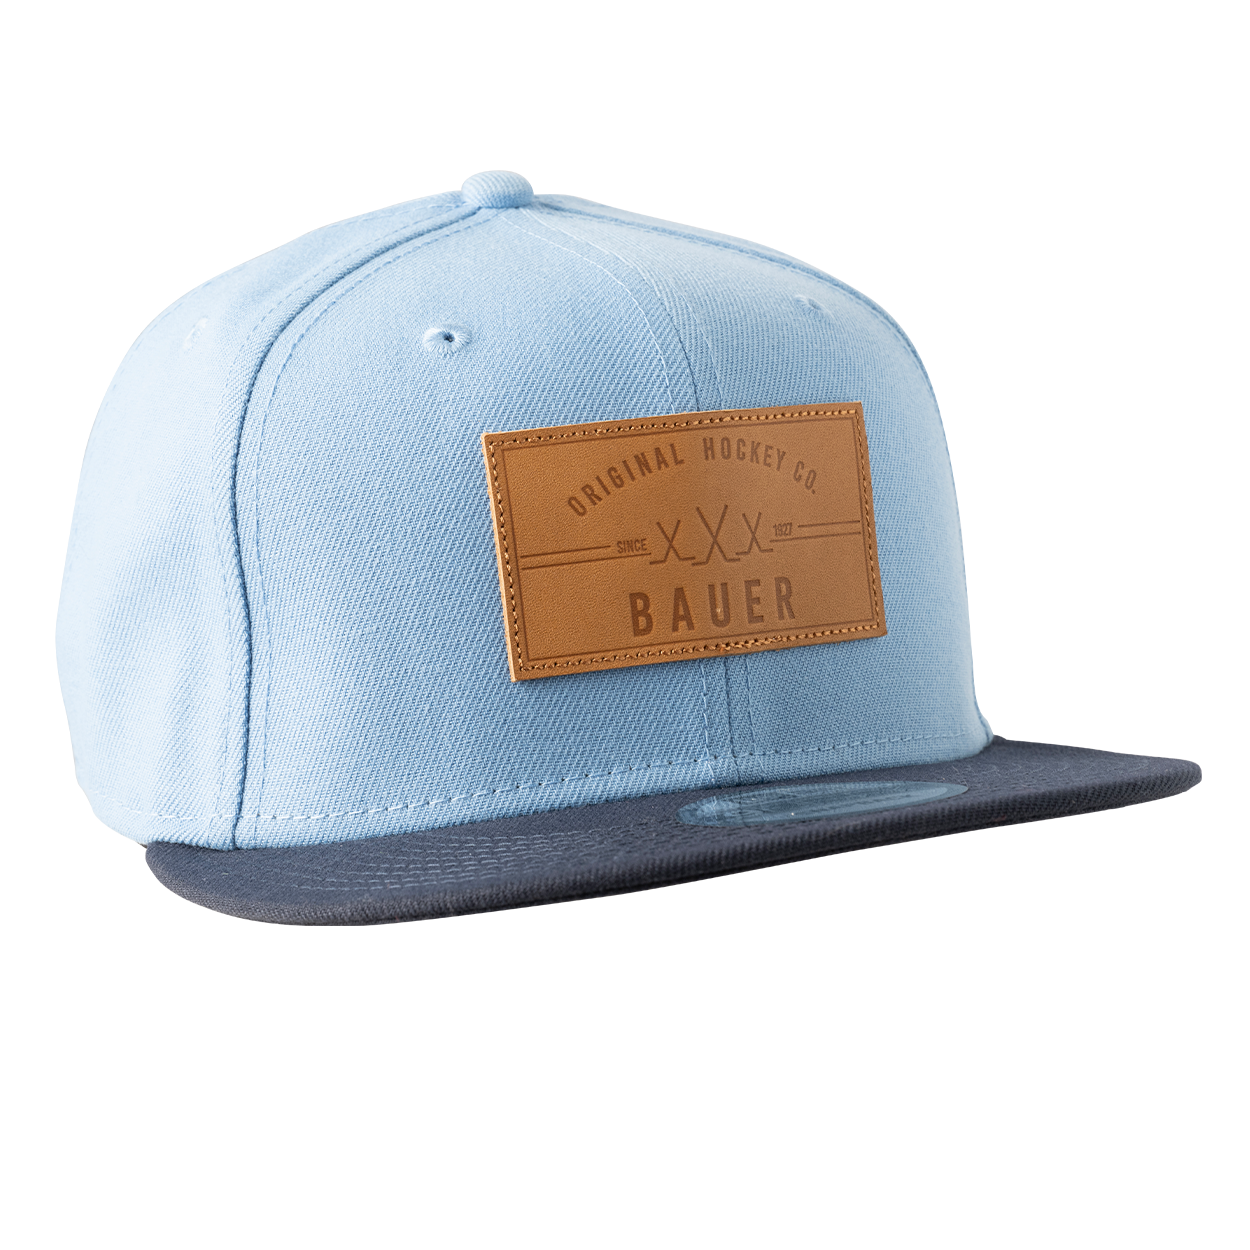 BAUER NEW ERA LEATHER PATCH 9FIFTY SENIOR